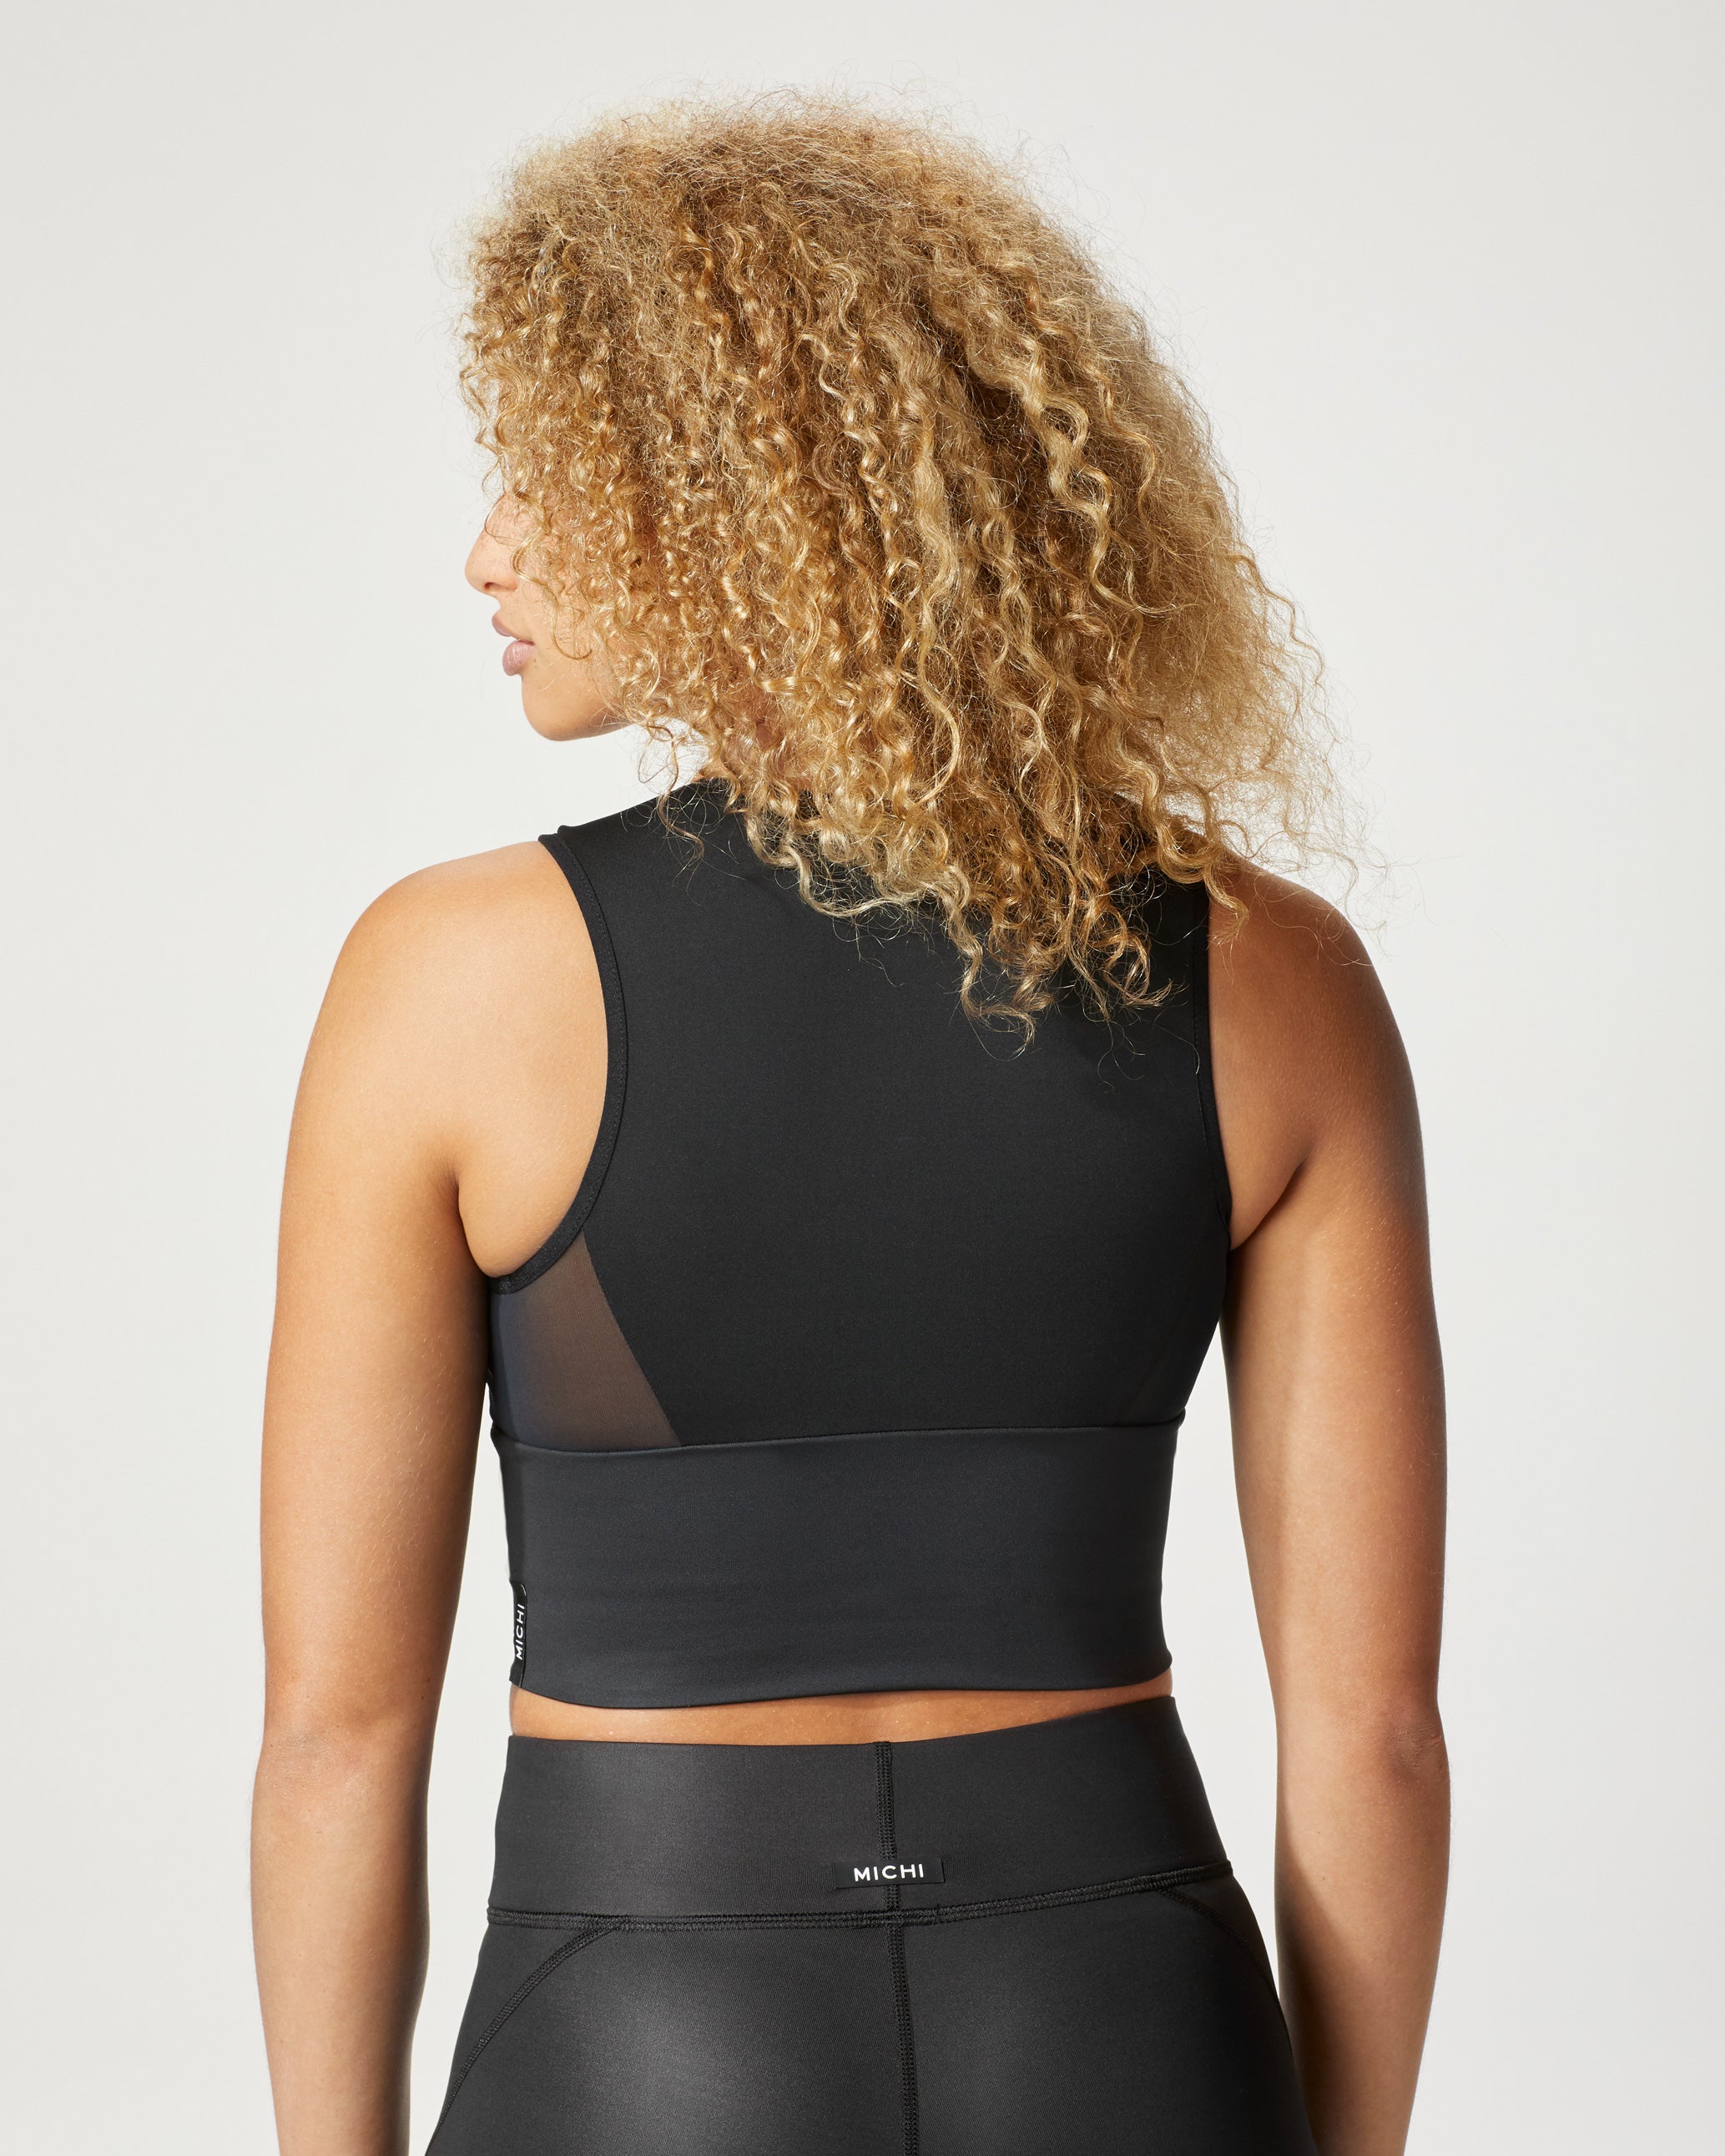 Shop the MICHI Rise Bustier | High-fashion Activewear Brand